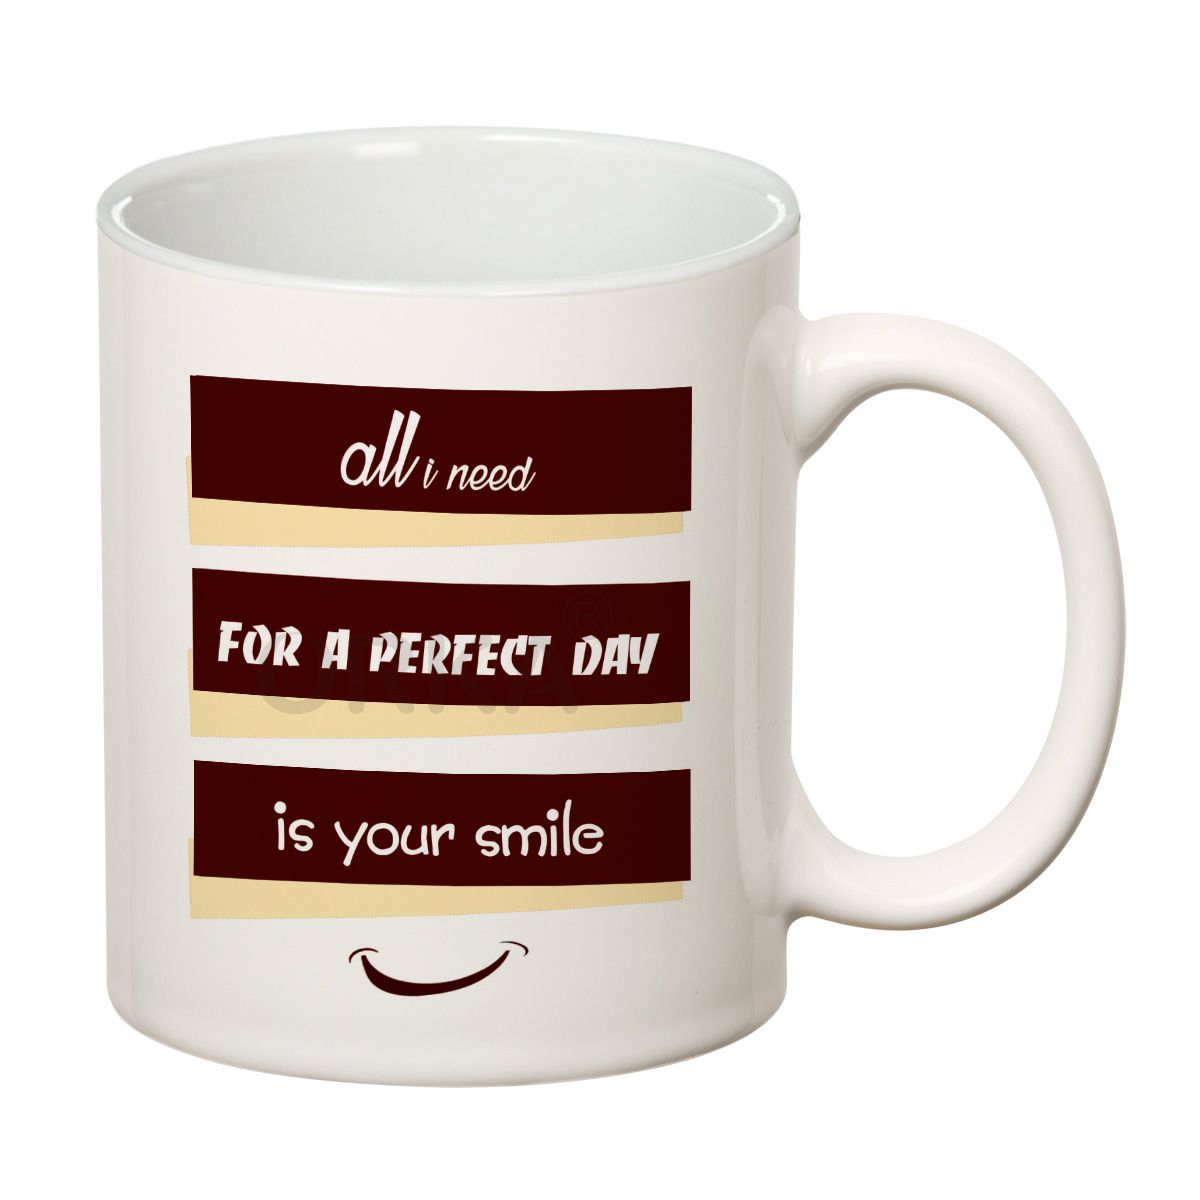 ORKA Coffee Mug Quotes Printed( All I Need For A Perfect Day Is Your Smile) Theme 11 Oz   